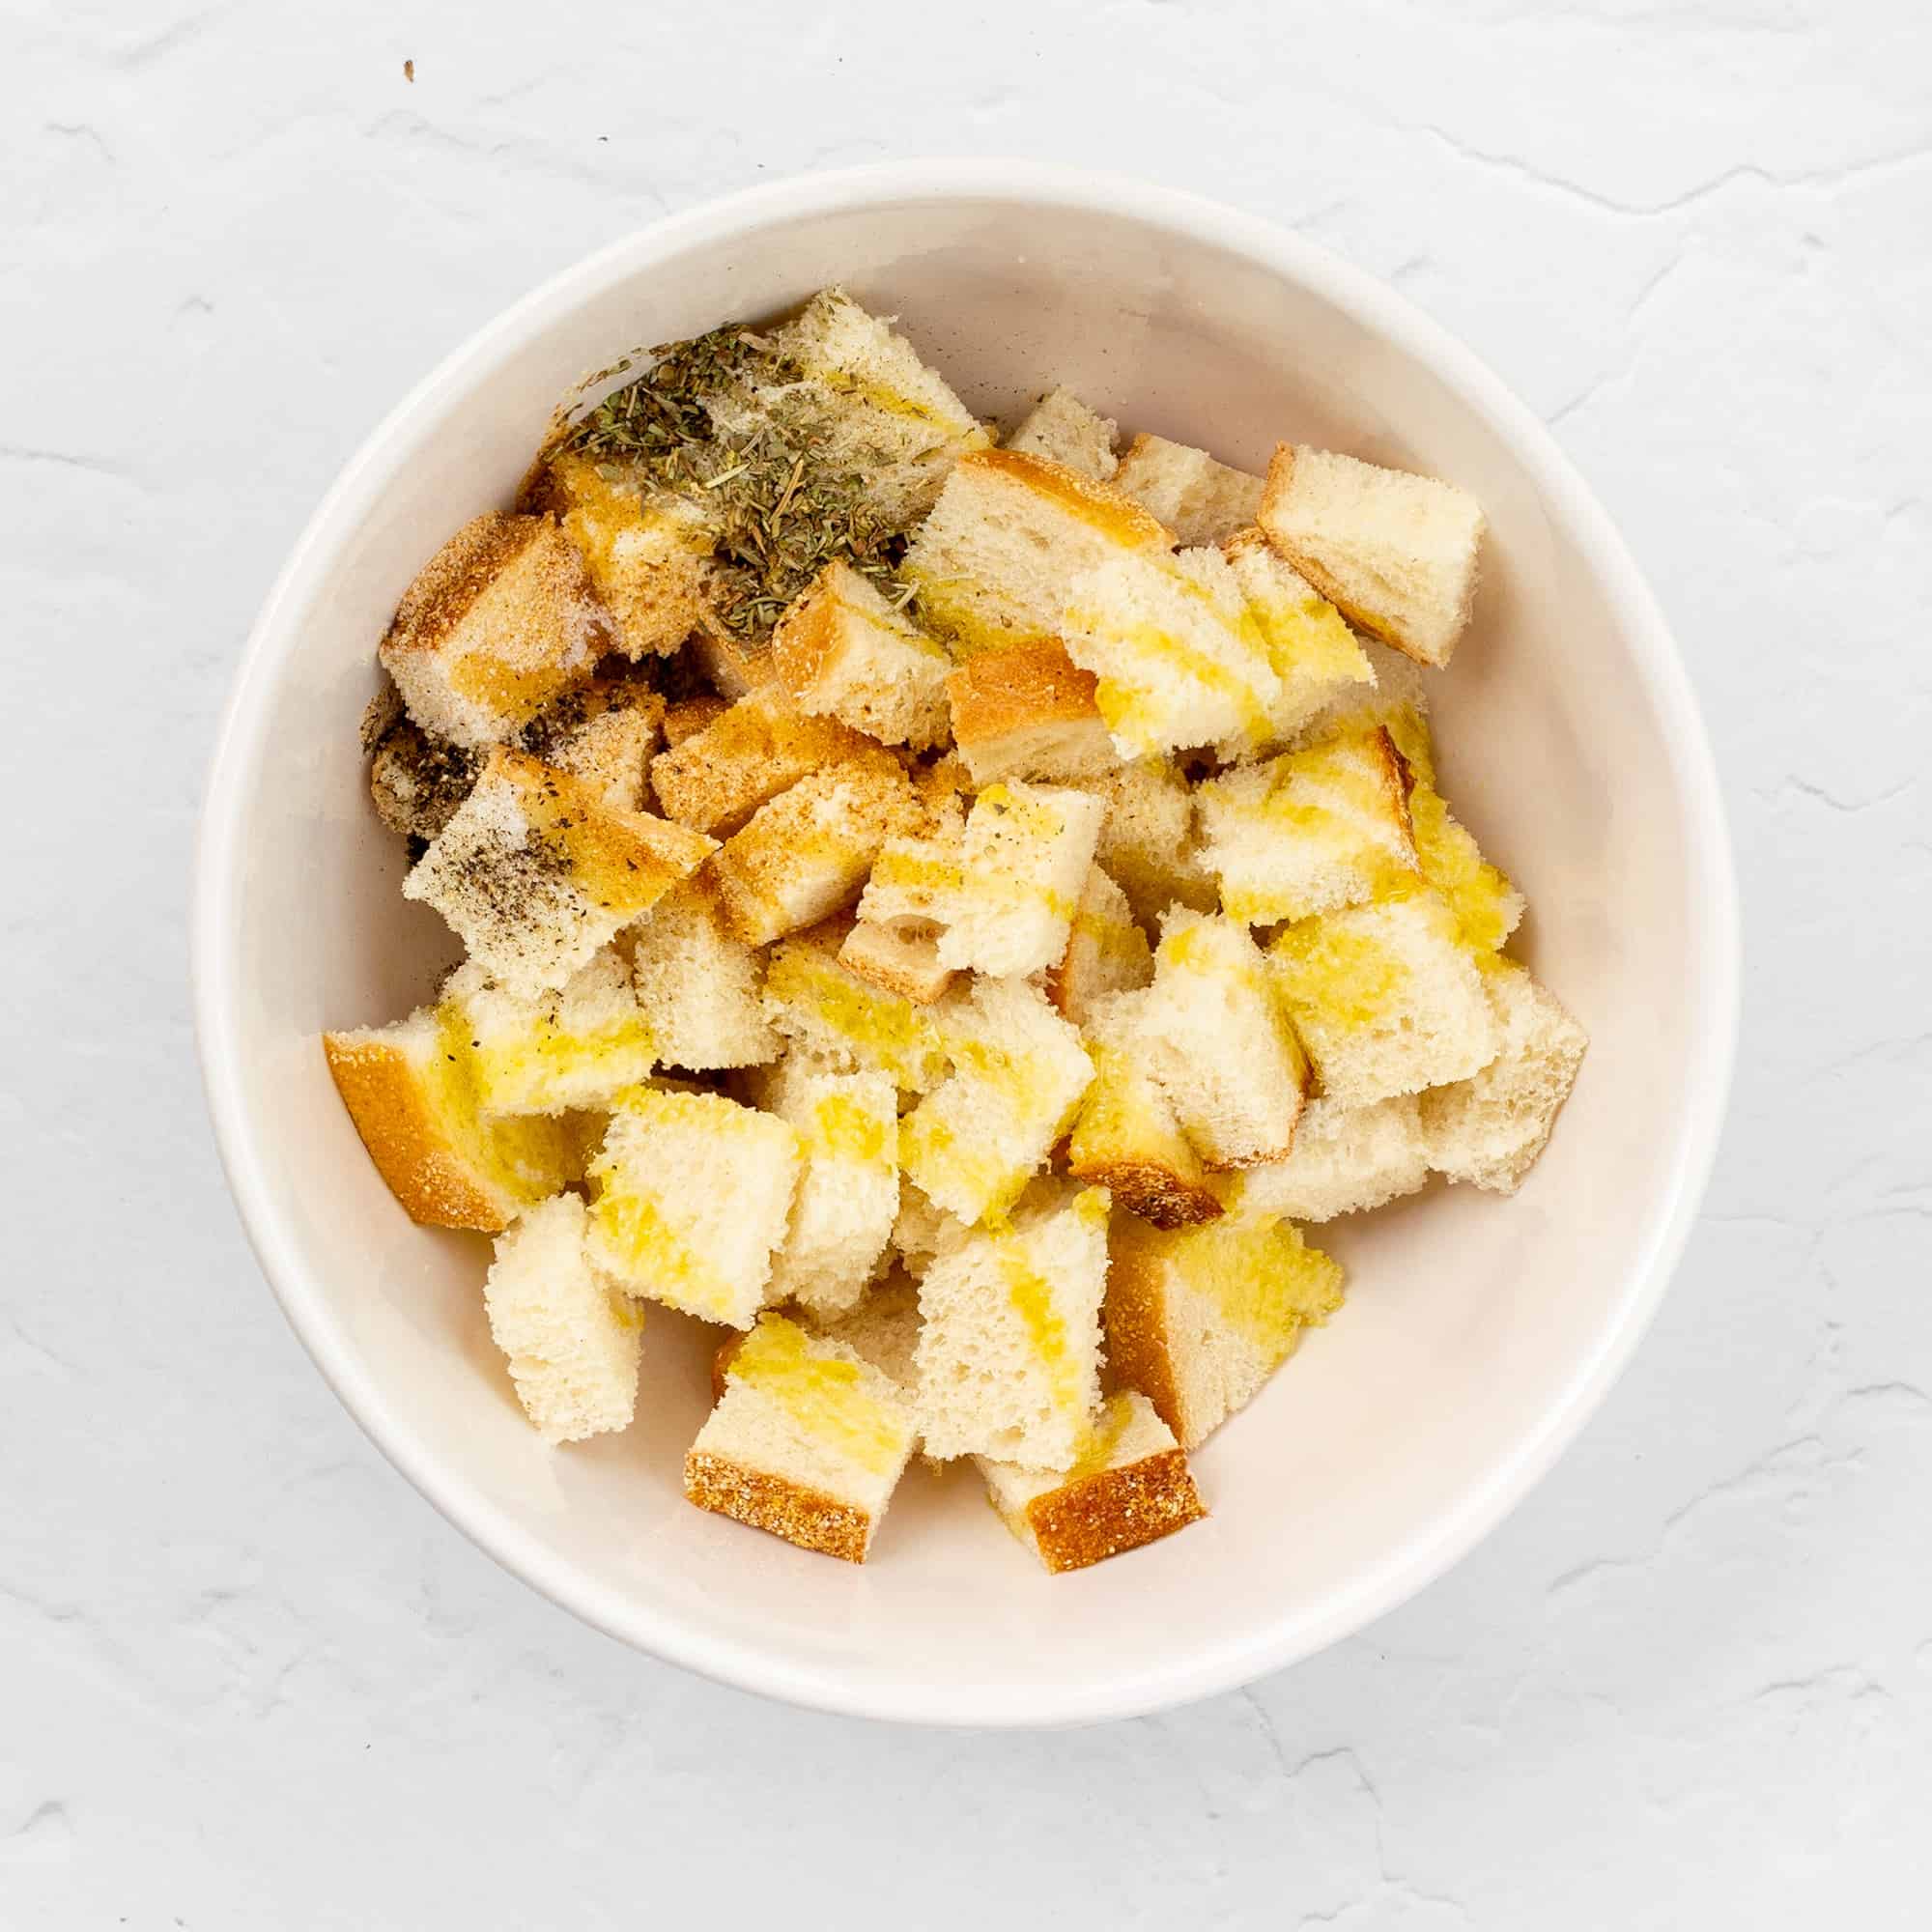 sourdough bread cubes in a bowl with seasonings